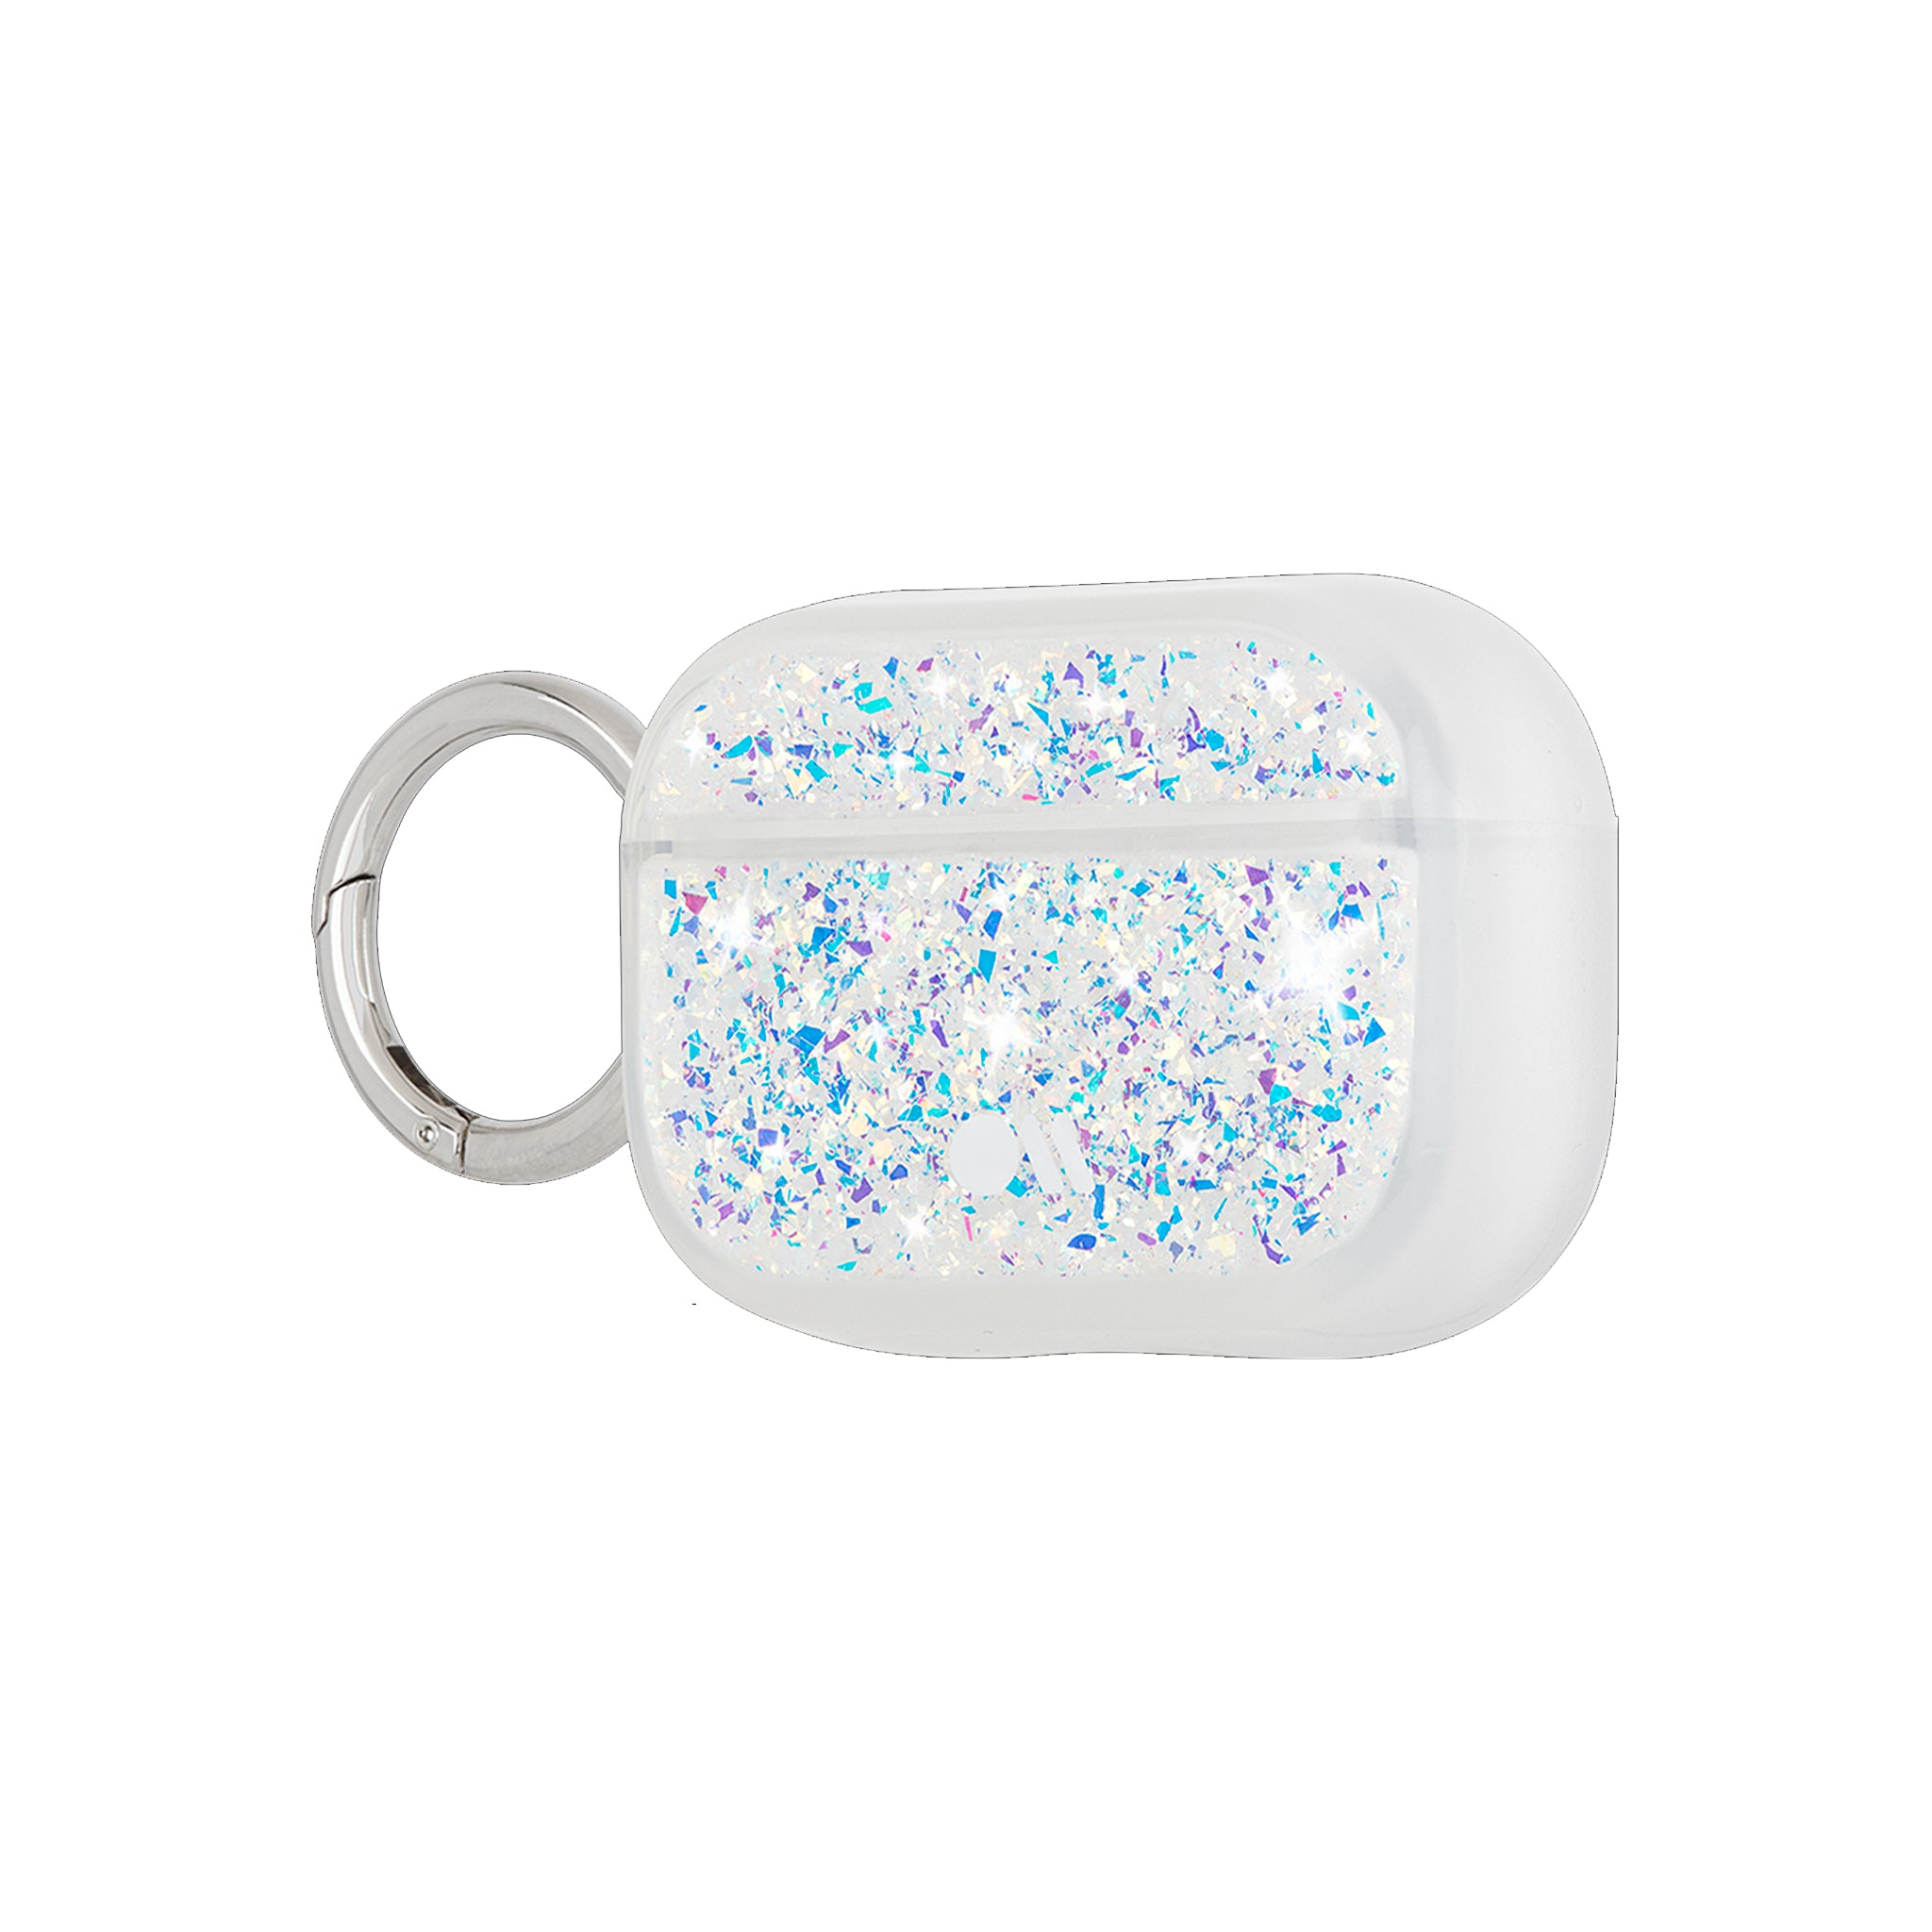 Case-mate - Twinkle Case For Apple Airpods Pro - Stardust